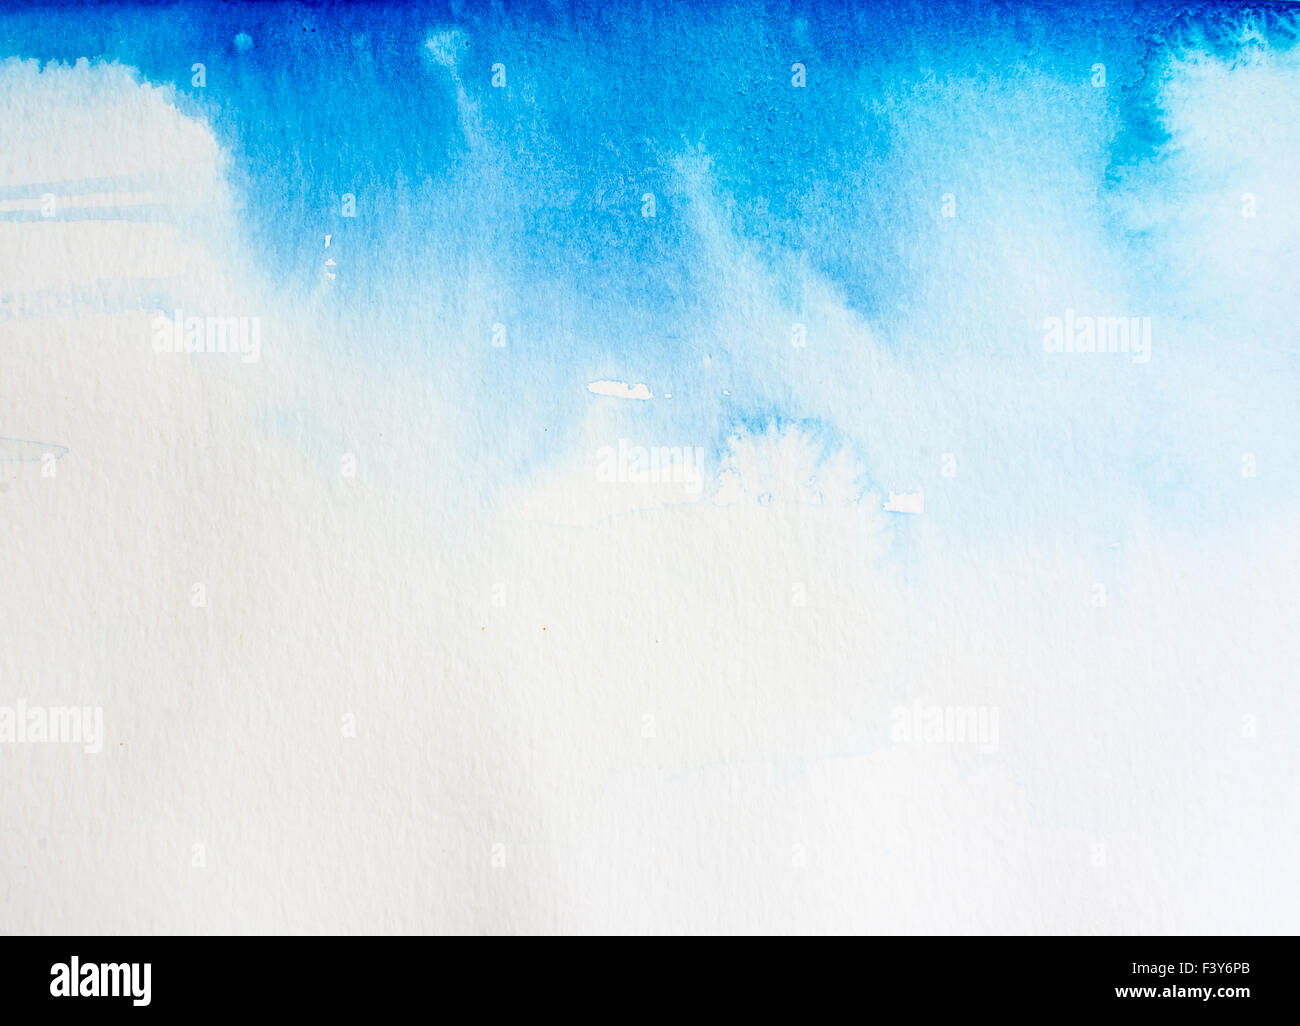 Watercolor background Heavens Stock Photo